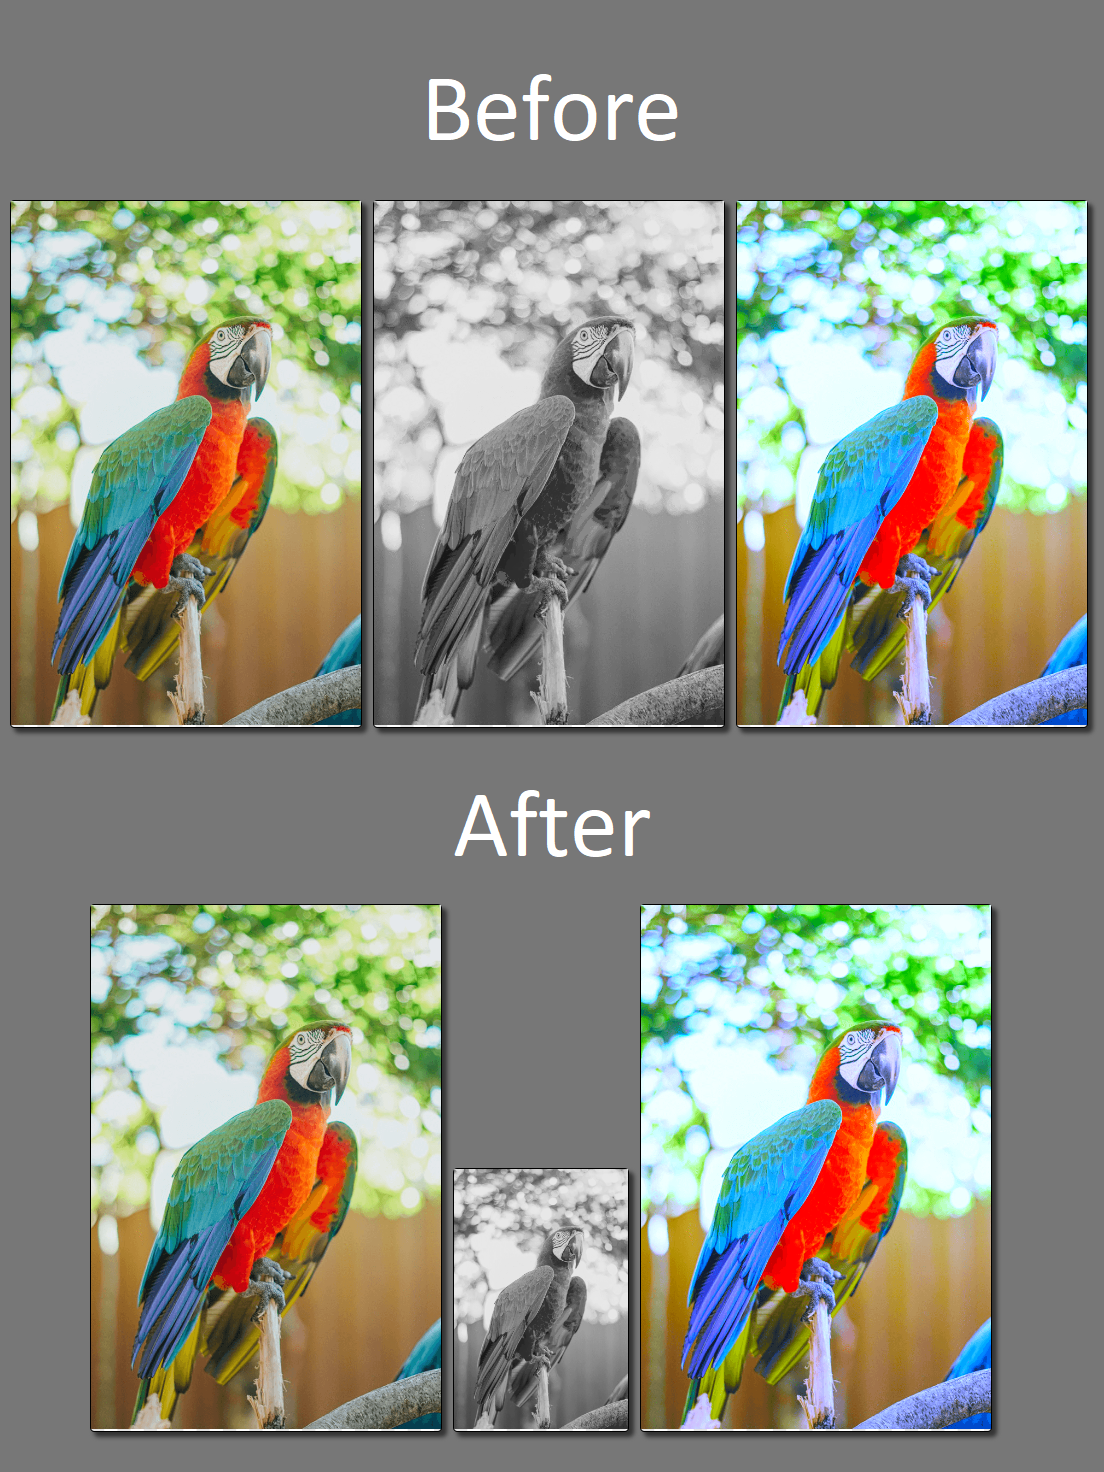 Image frames before and after resizing a single frame using GemBox.Imaging